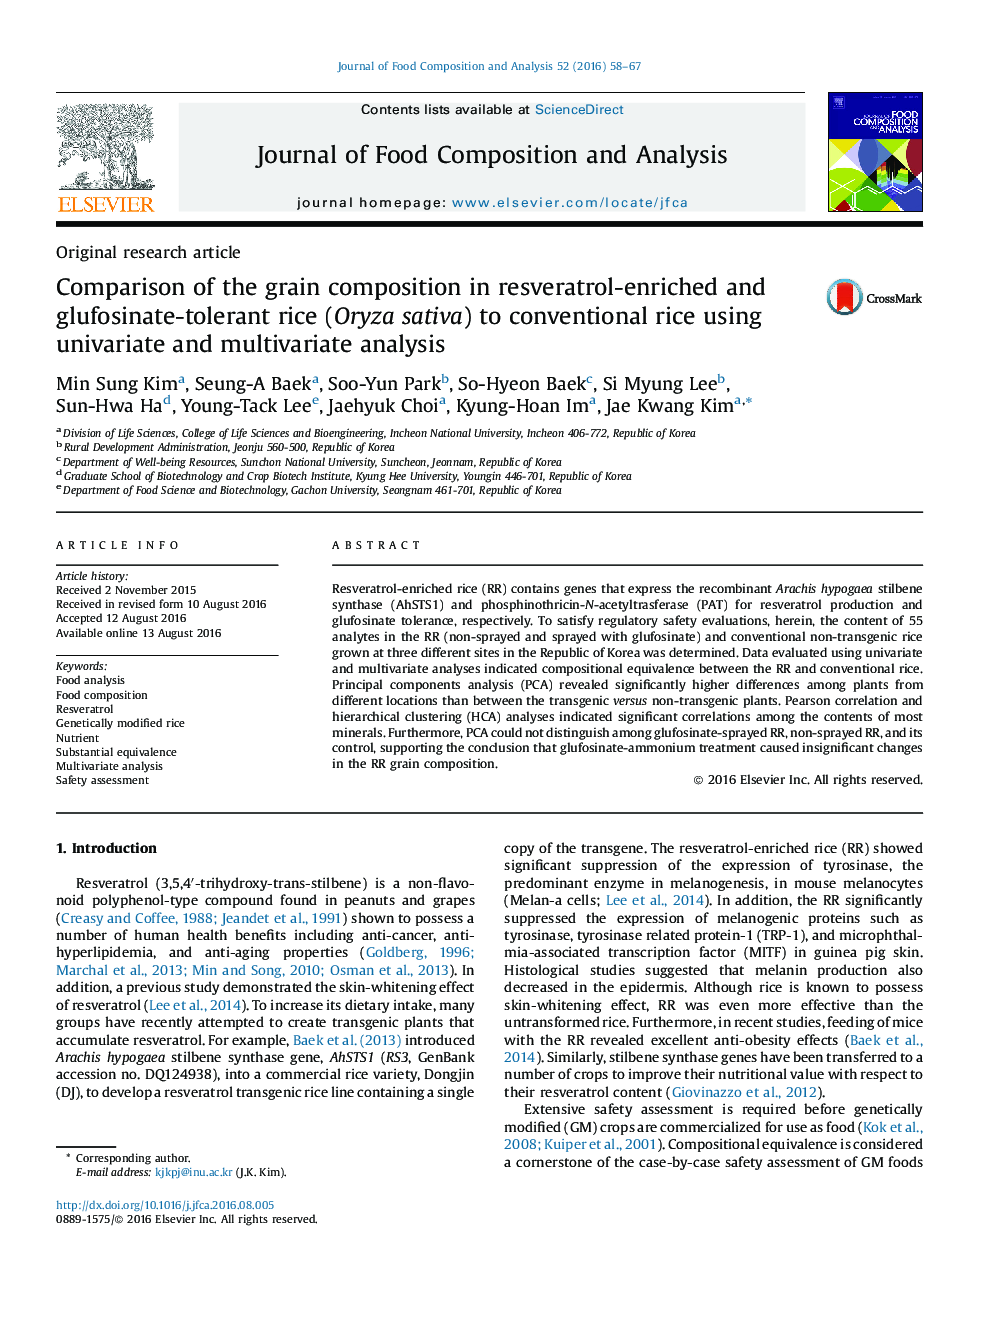 Comparison of the grain composition in resveratrol-enriched and glufosinate-tolerant rice (Oryza sativa) to conventional rice using univariate and multivariate analysis